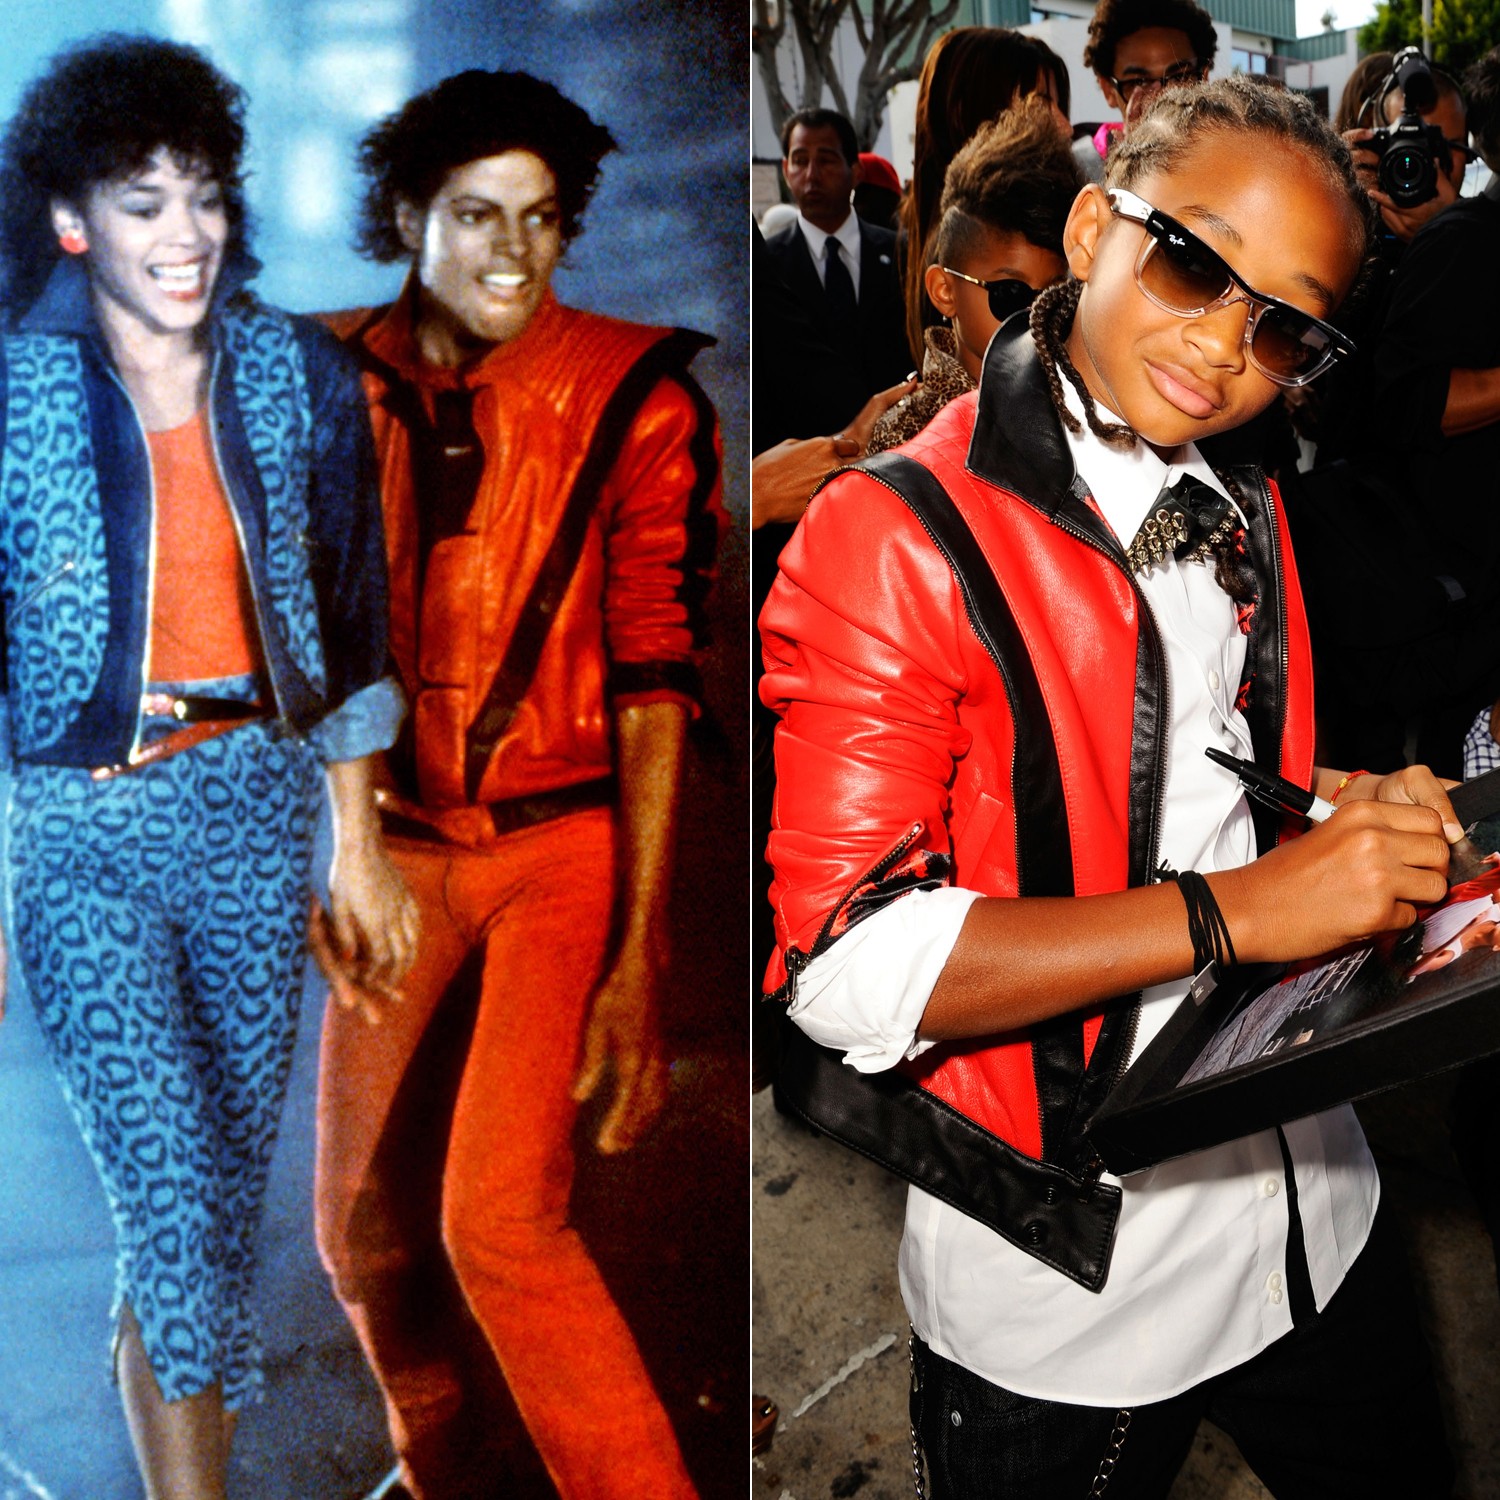 Michael Jackson Influenced 80s Fashion by His Jacket & Songs